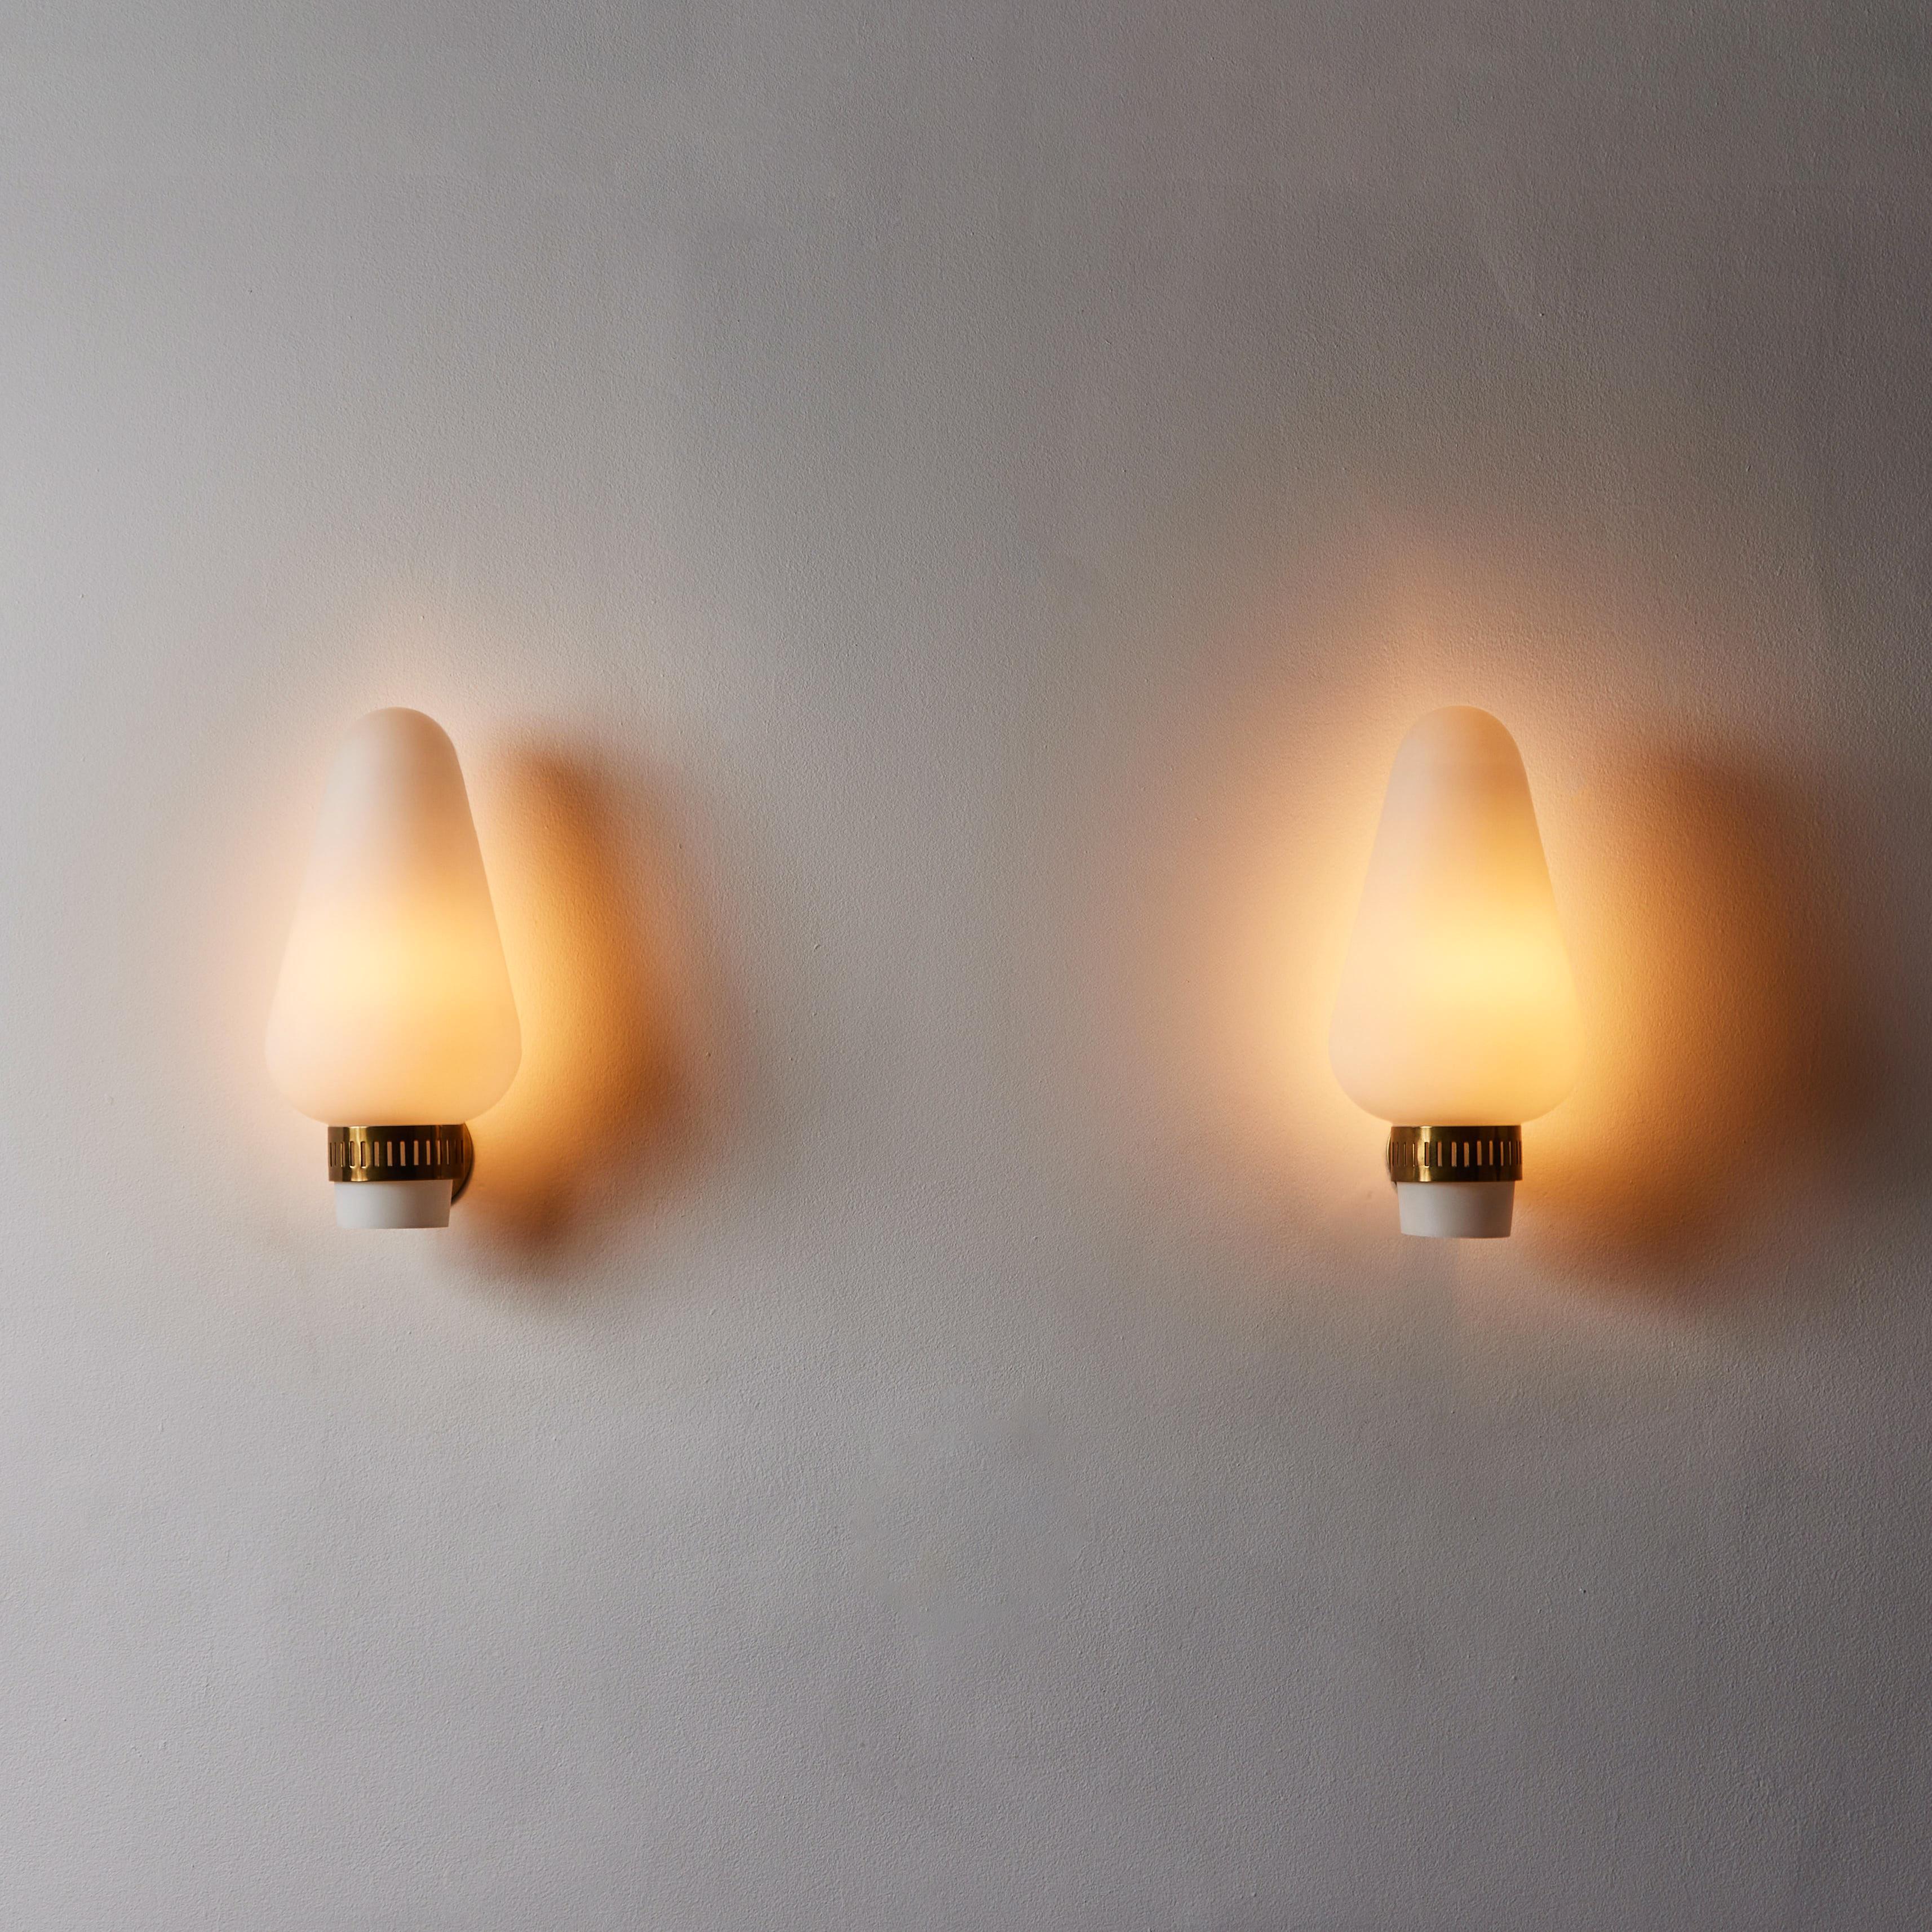 Pair of sconces by Stilnovo. Manufactured in Italy, circa 1960s. Brushed satin glass, brass. Custom brass backplate. Wired for U.S. standards. We recommend one E26 60w maximum bulb per sconce. Bulbs provided as a onetime courtesy.